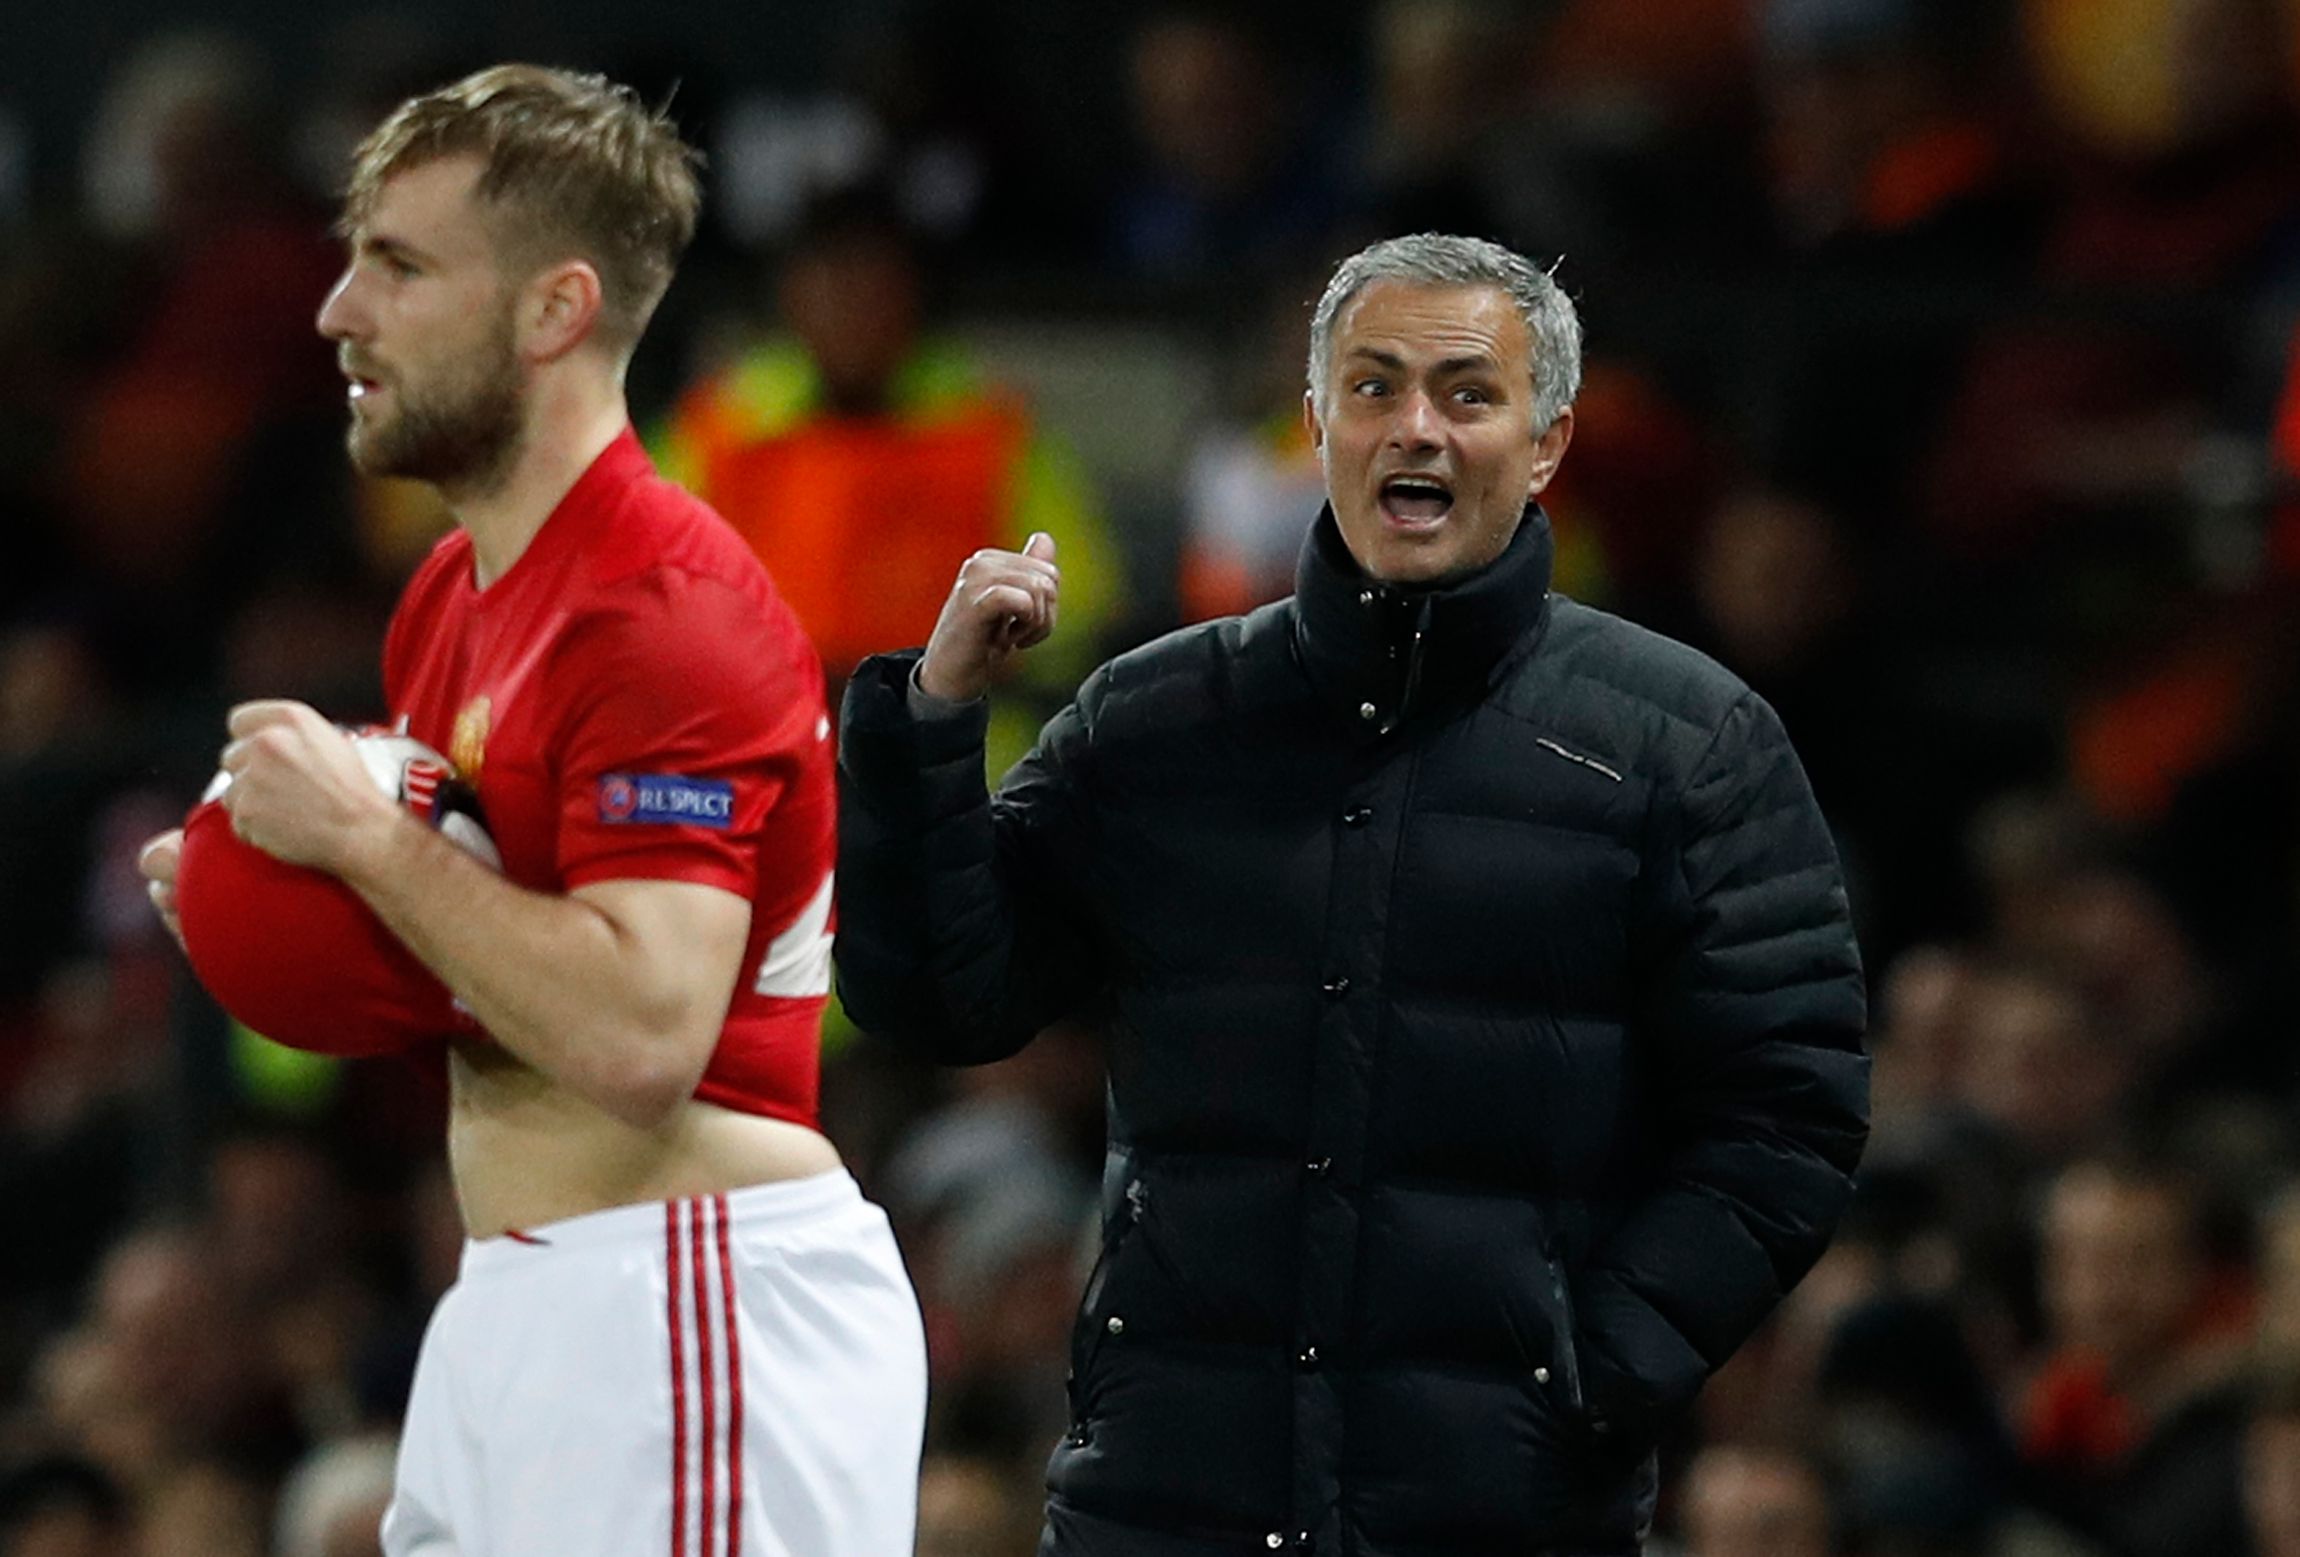 Britain Football Soccer - Manchester United v Feyenoord - UEFA Europa League Group Stage - Group A - Old Trafford, Manchester, England - 24/11/16 Manchester United's Luke Shaw prepares to take a throw as manager Jose Mourinho looks on Reuters / Phil Noble Livepic EDITORIAL USE ONLY.